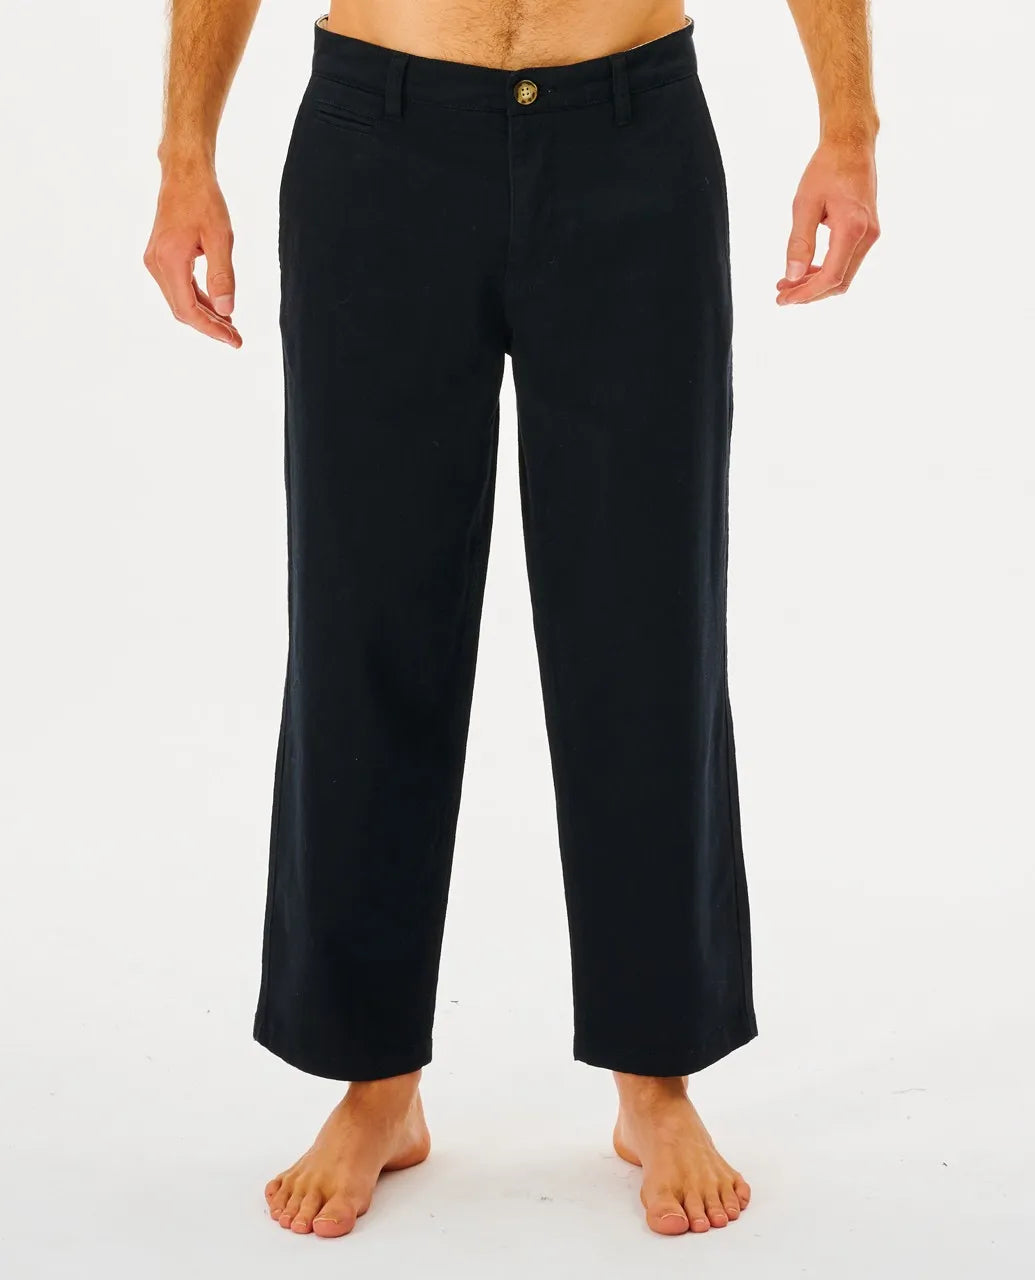 Quality Surf Products Pant